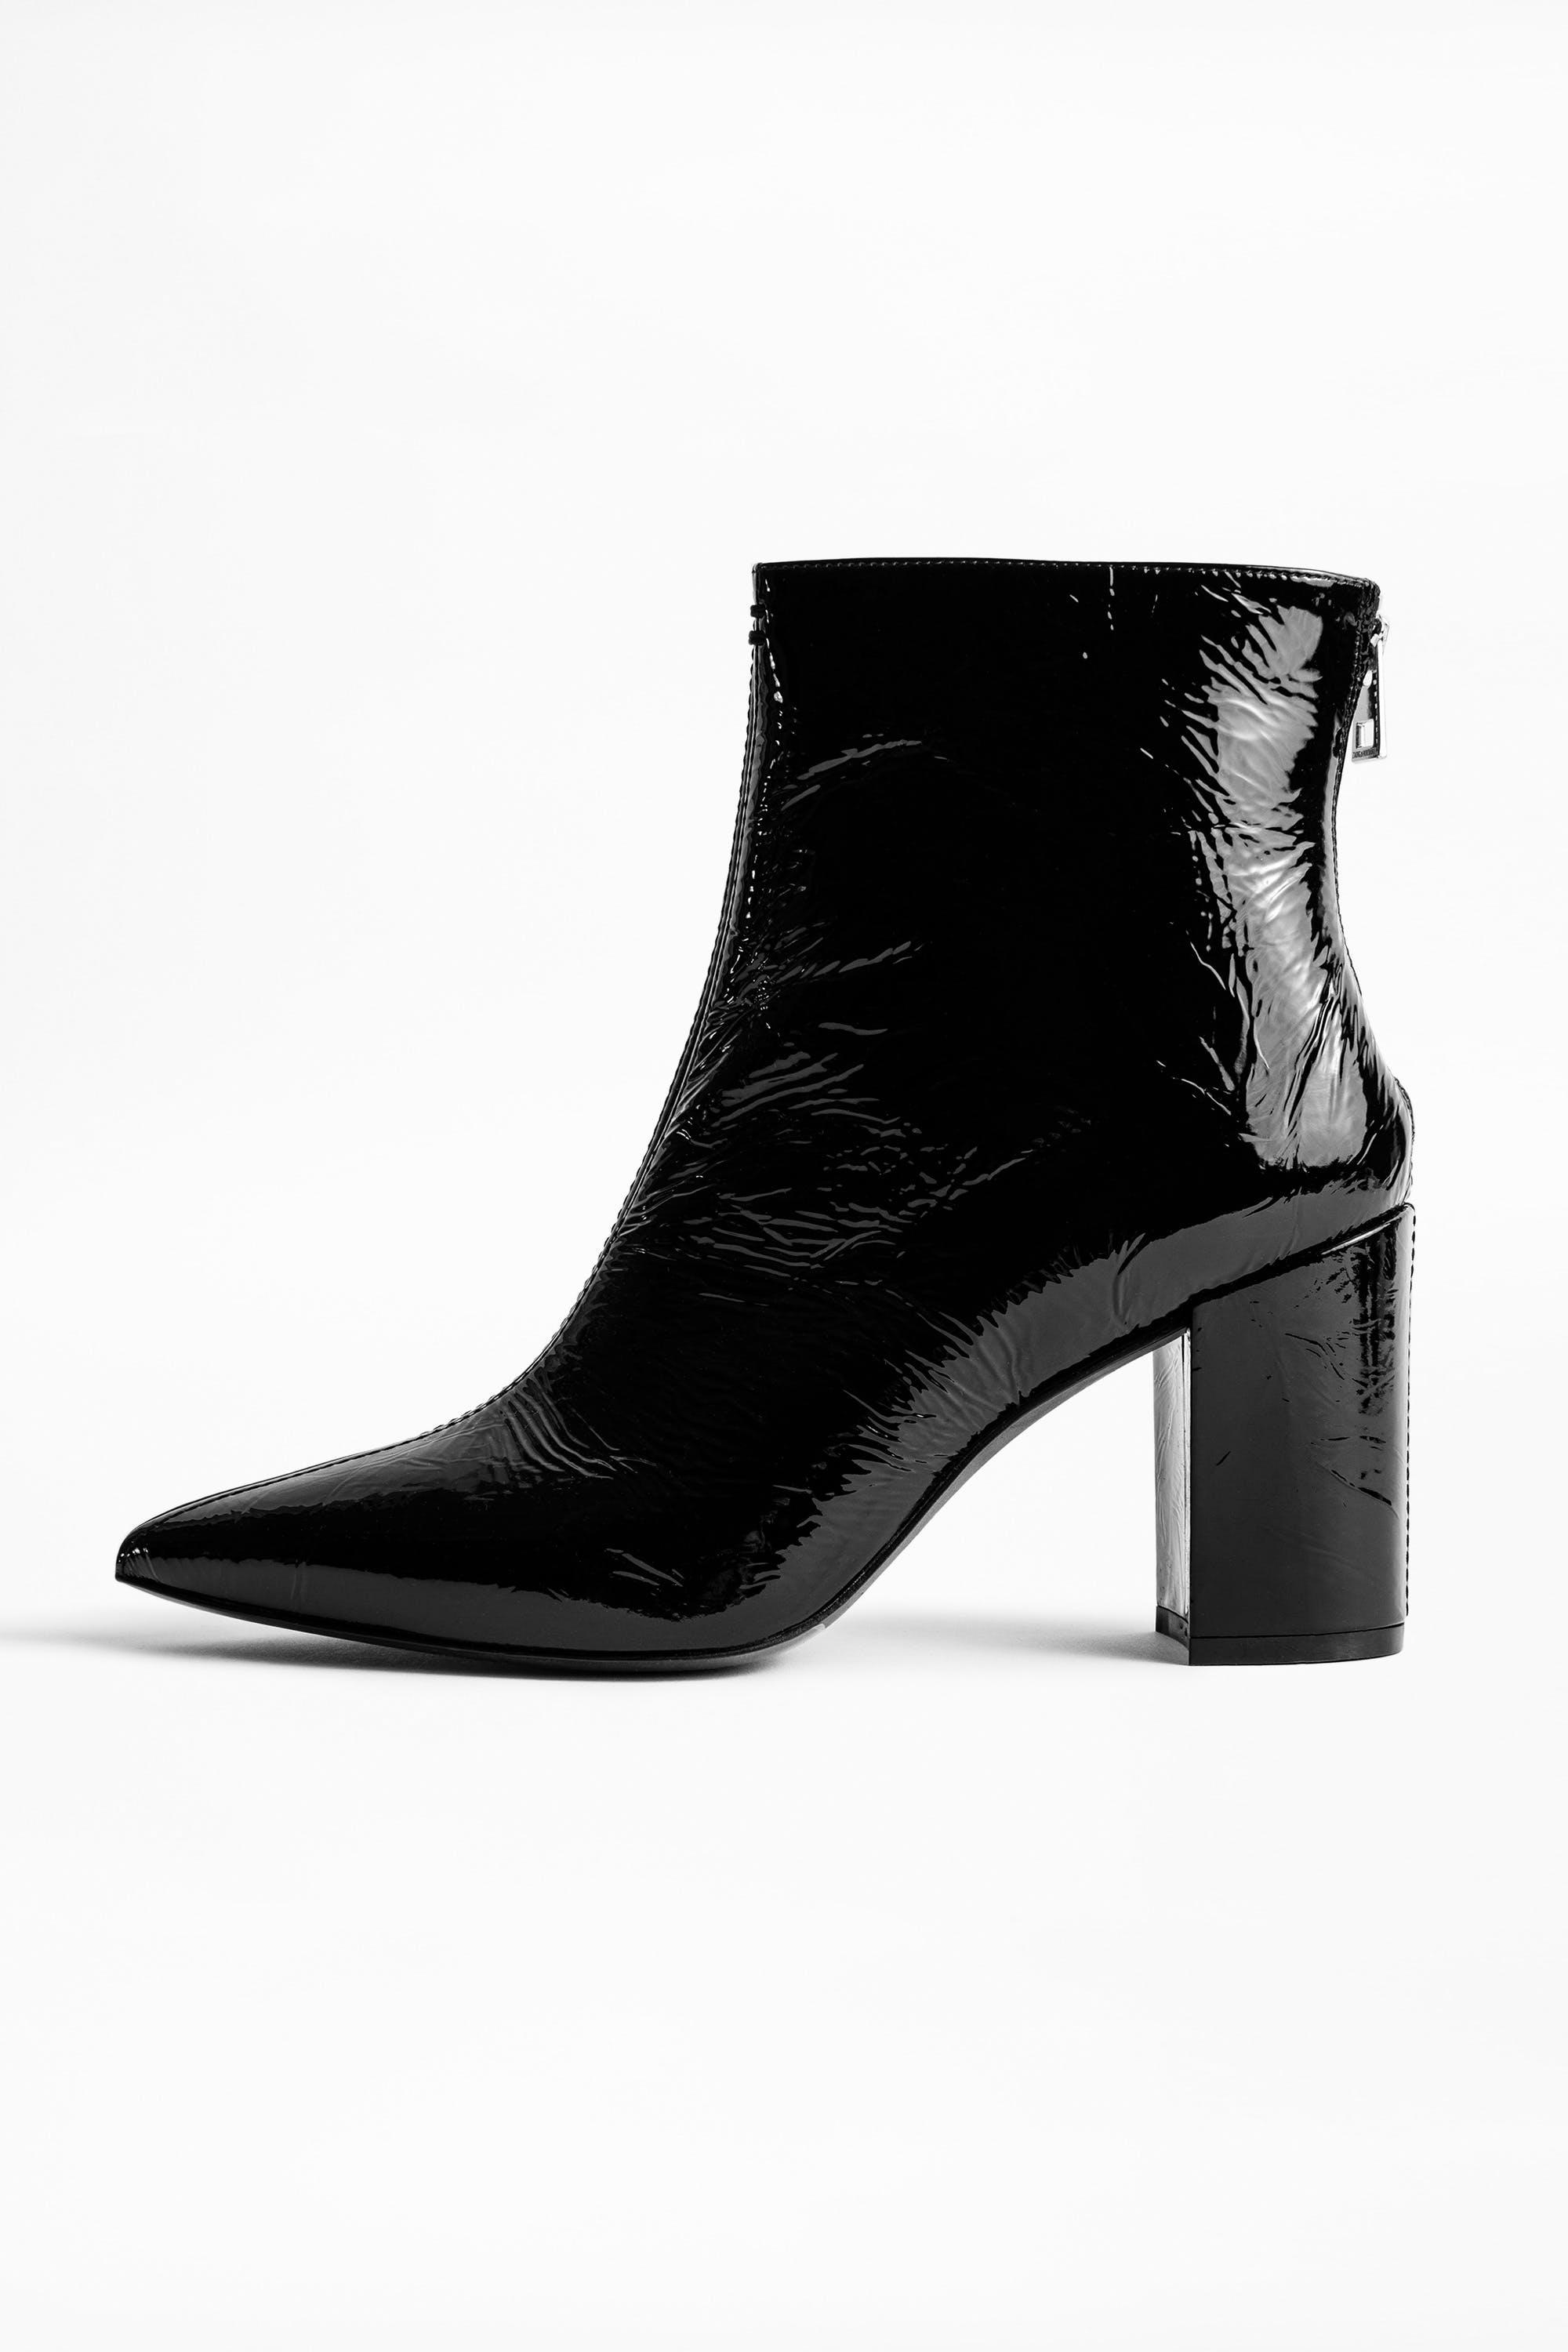 Zadig & Voltaire Glimmer Vernis Ankle Boots in Black | Lyst